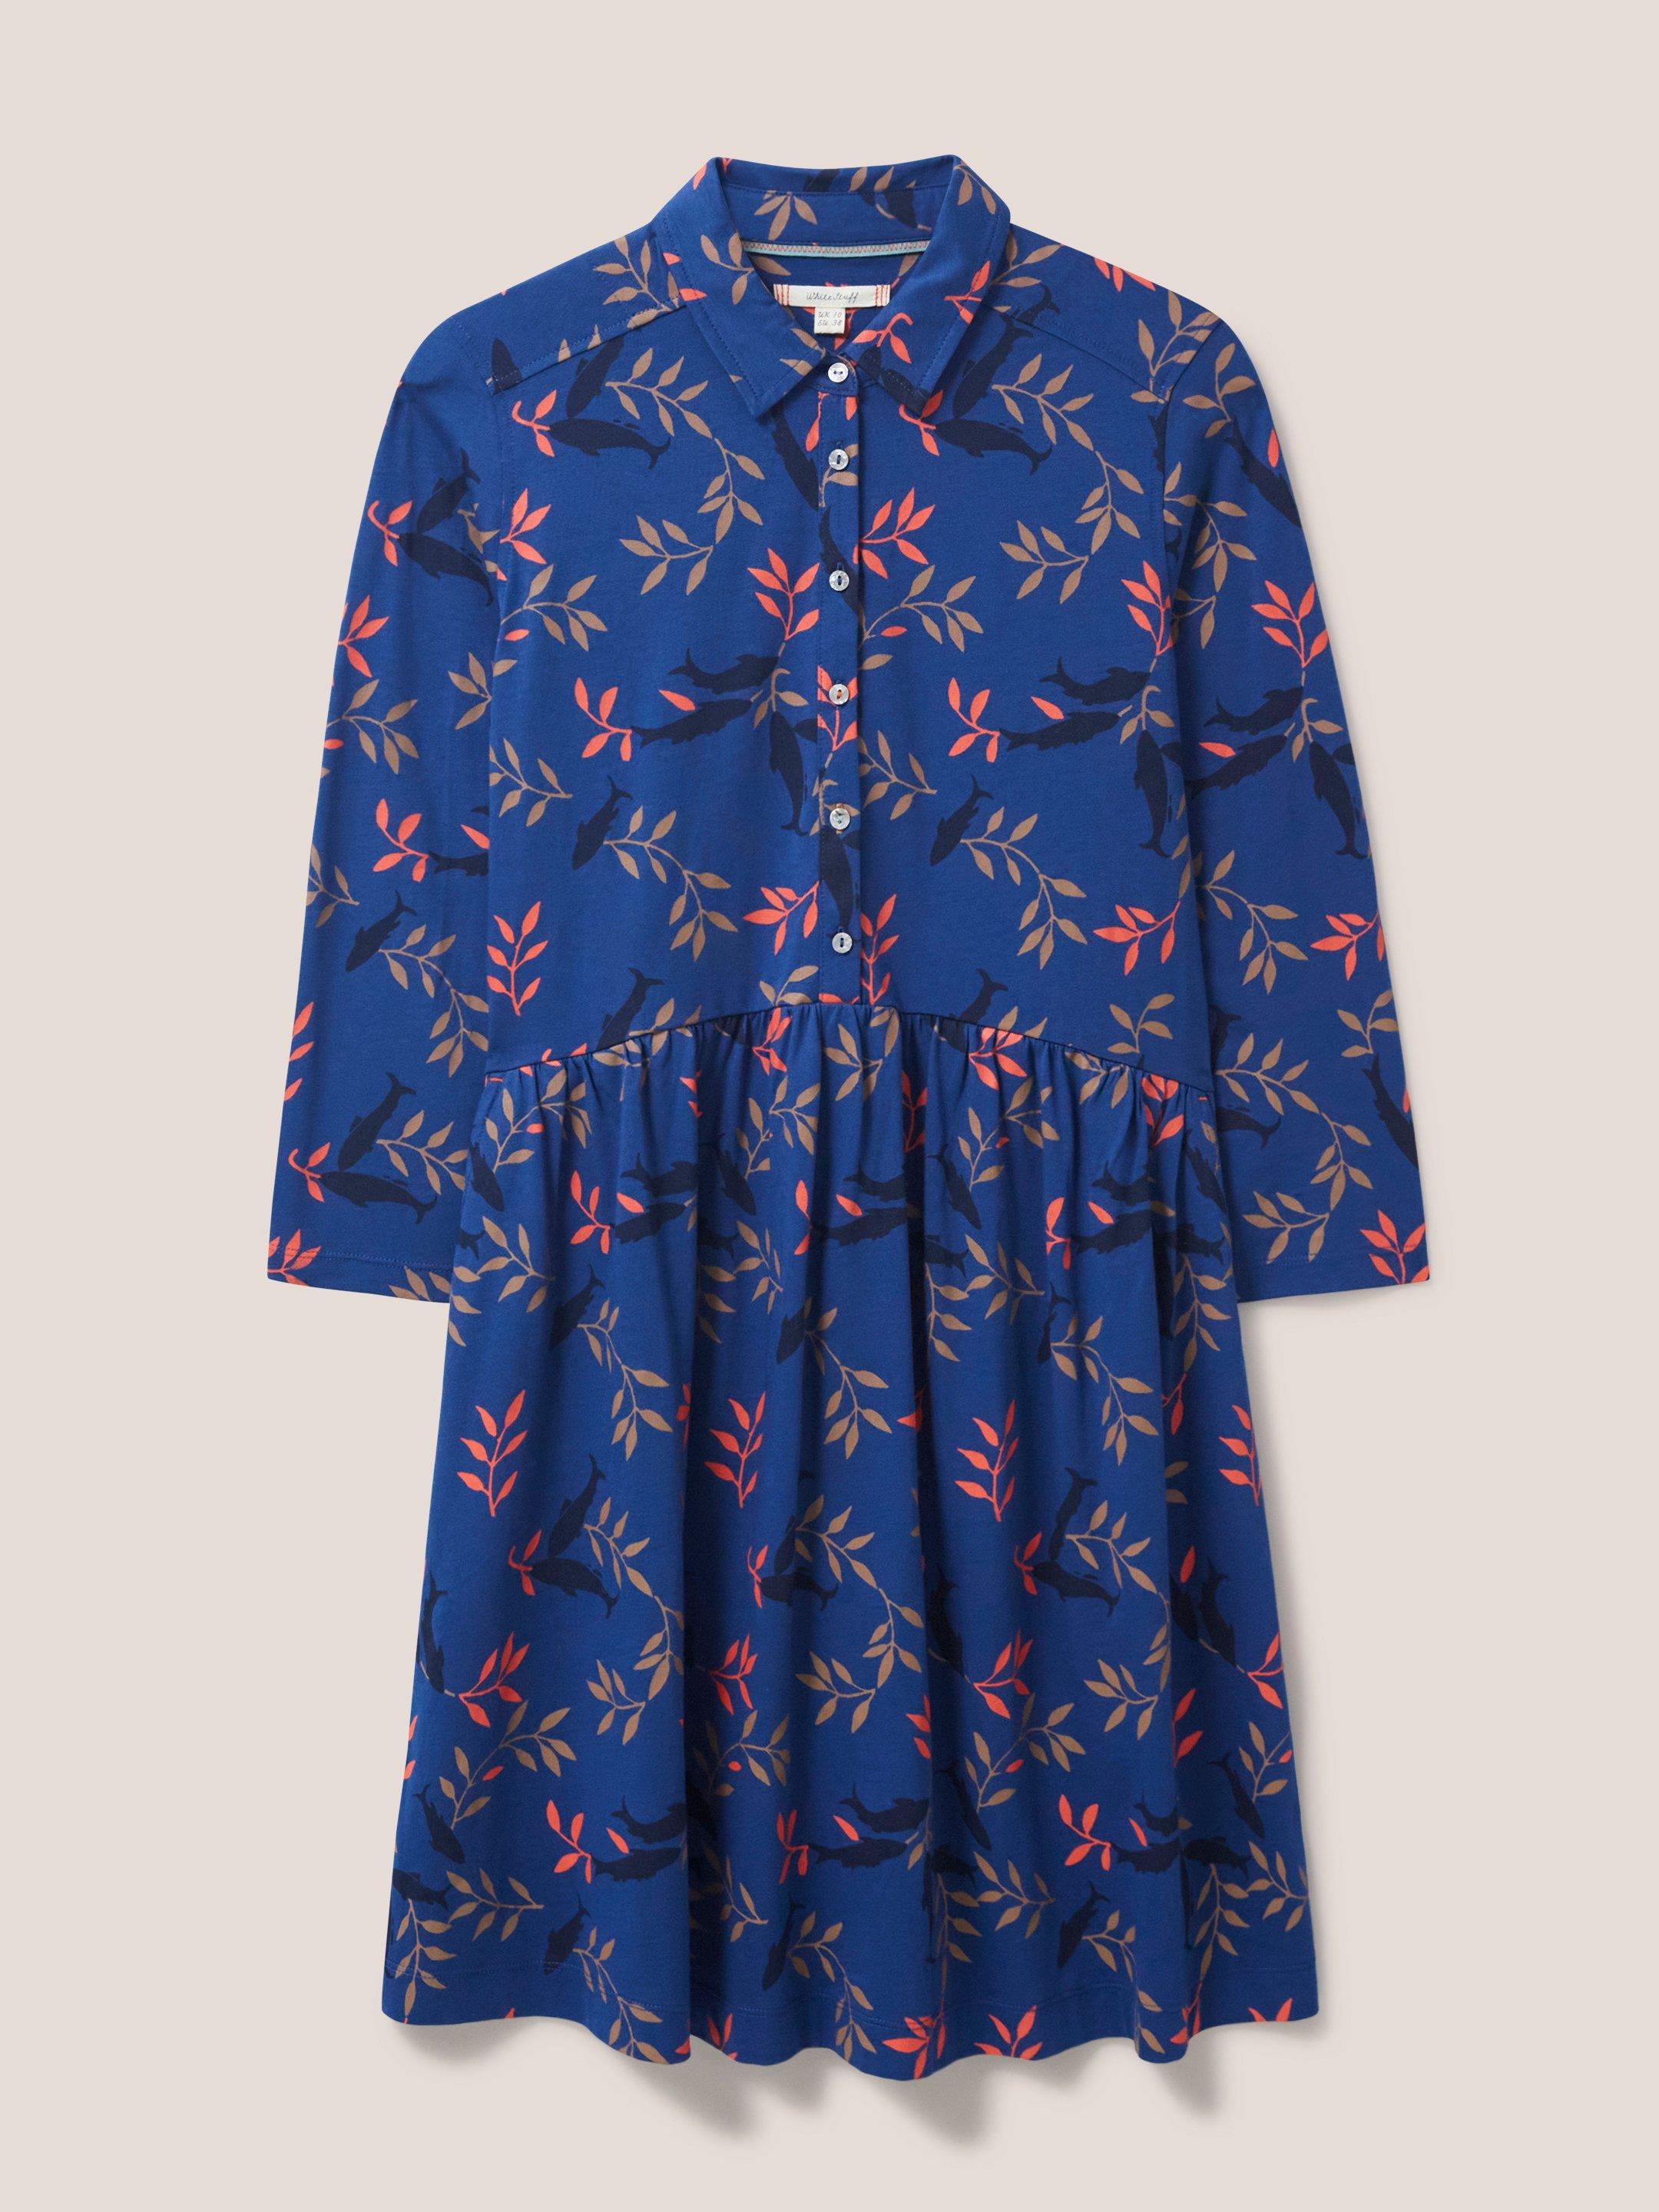 Everly Jersey Dress in NAVY MULTI - FLAT FRONT